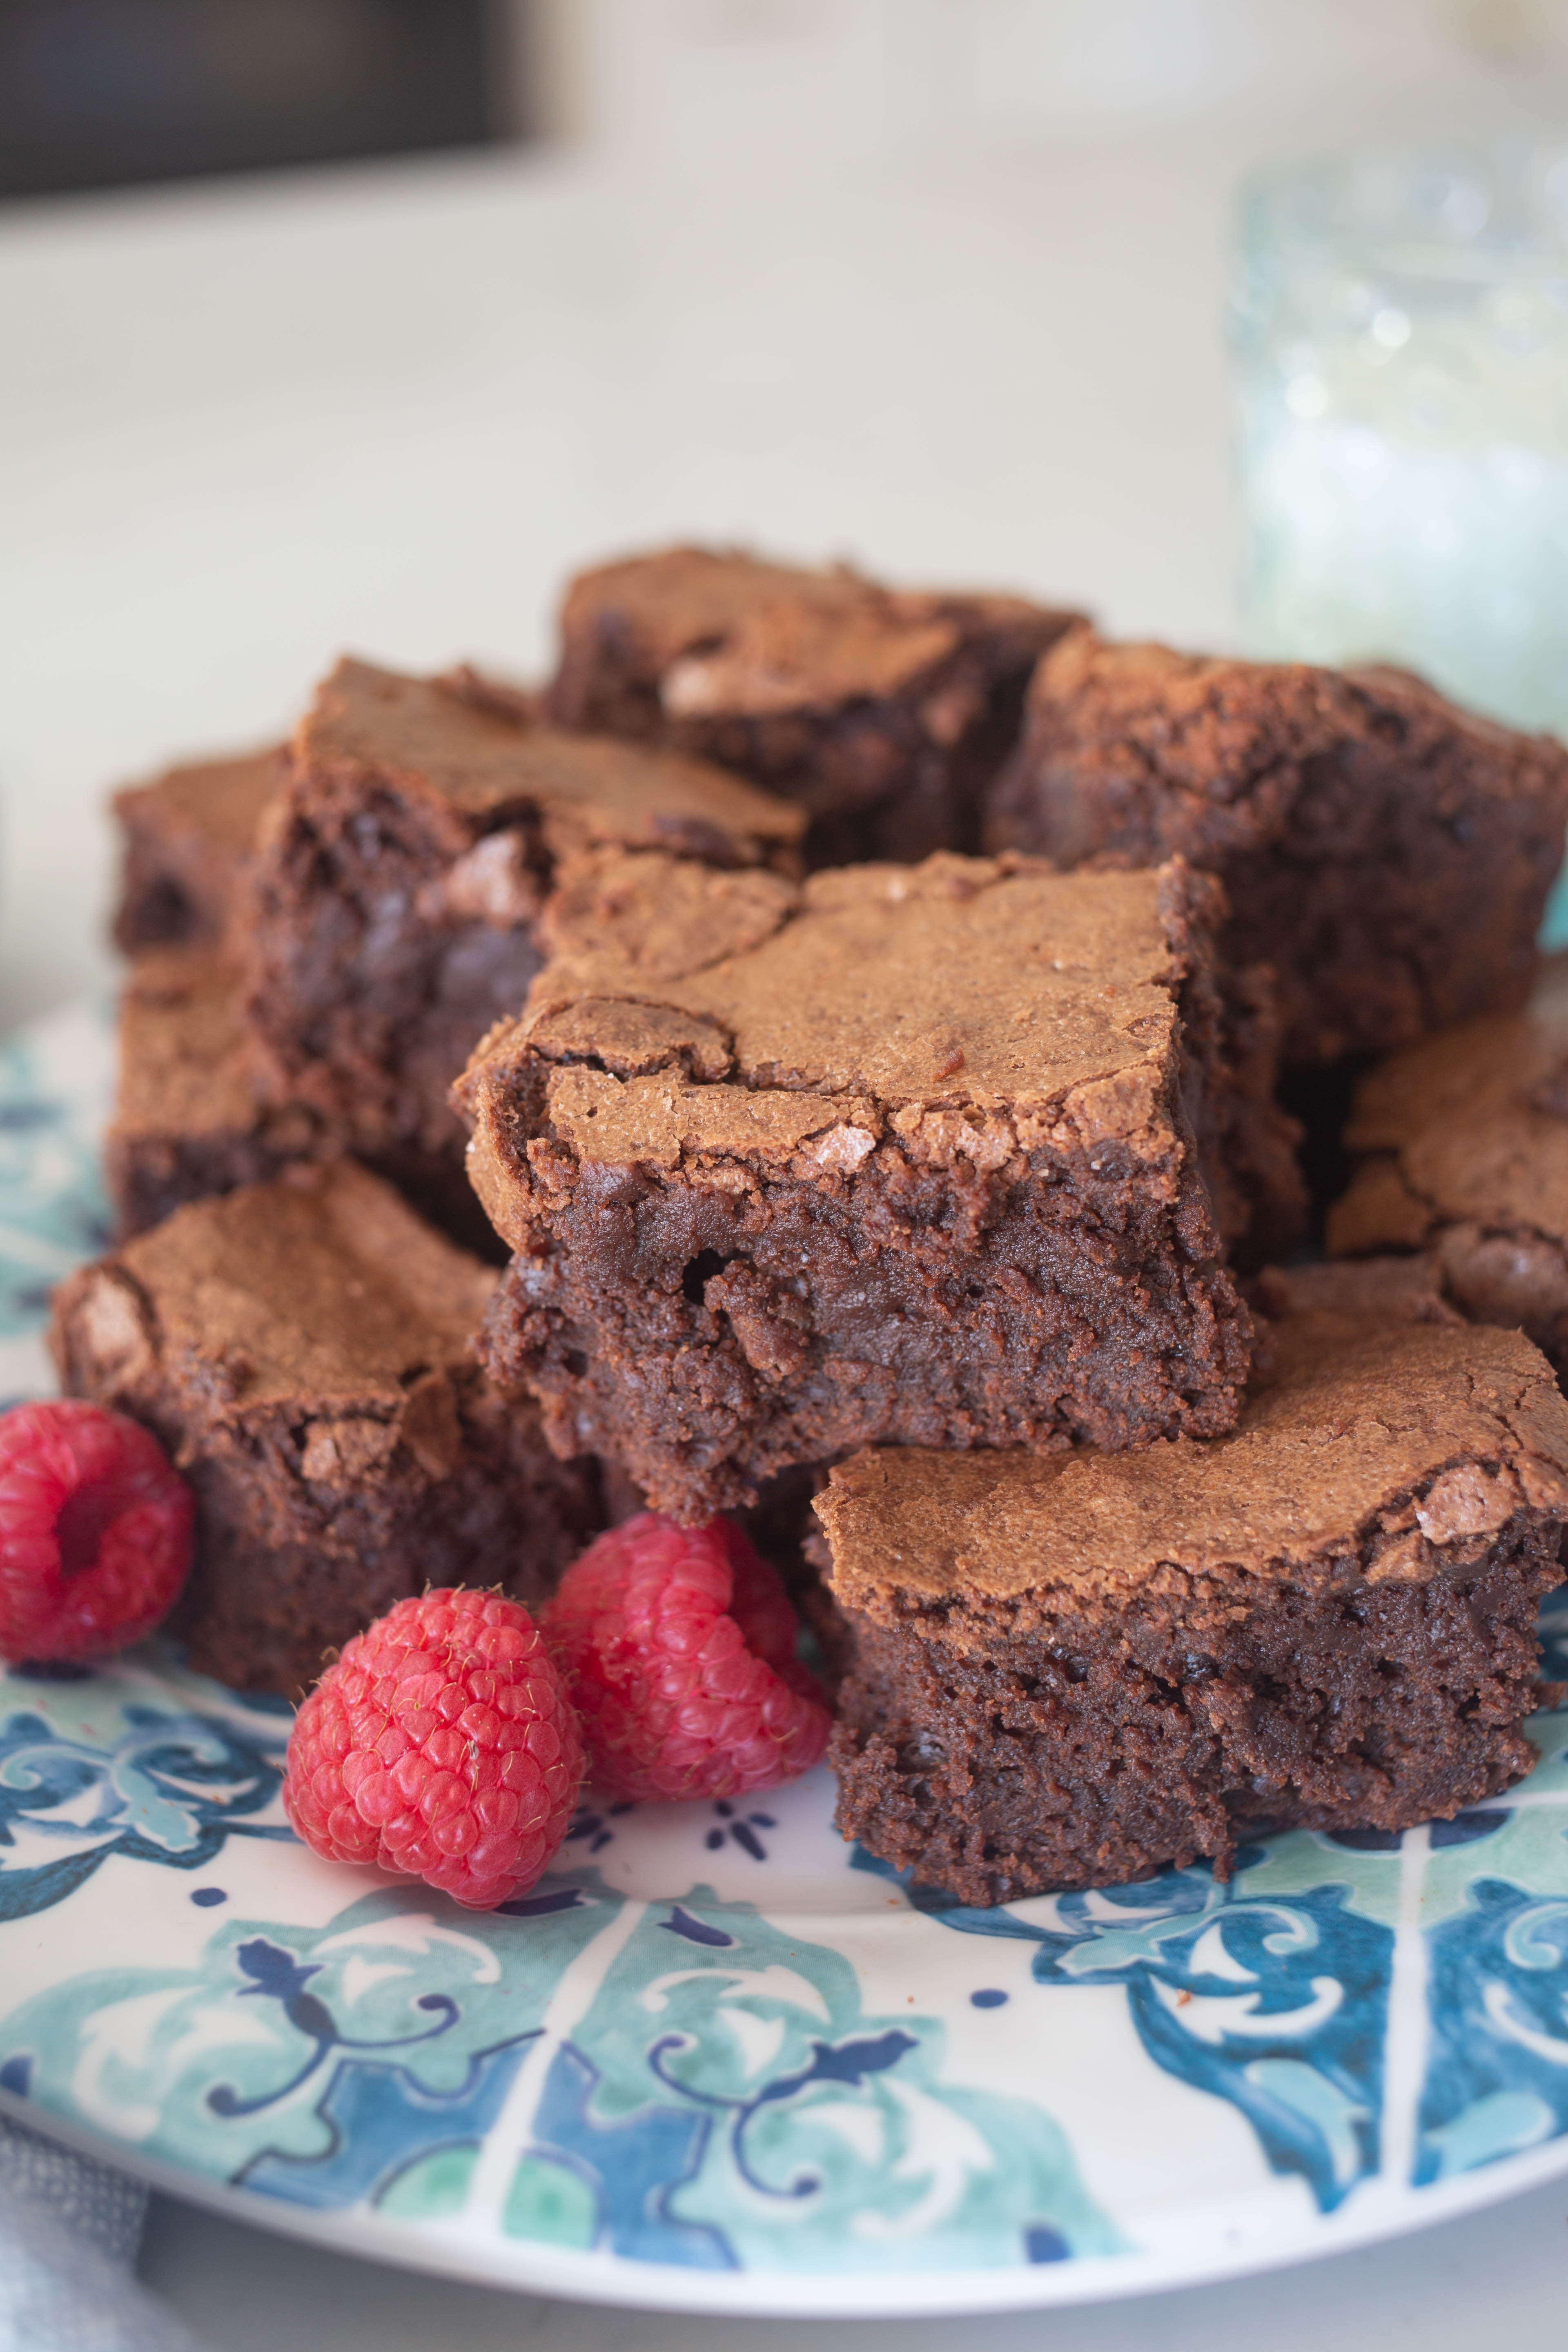 Easy Brownies from Scratch - Best Brownies from Scratch - How to Make Brownies for Beginners - Brownie Recipe with Cocoa Powder - Chocolate Chip Brownies - Homemade Brownies from Scratch - How to Make Brownies from Scratch - Disgustingly Rich Brownies